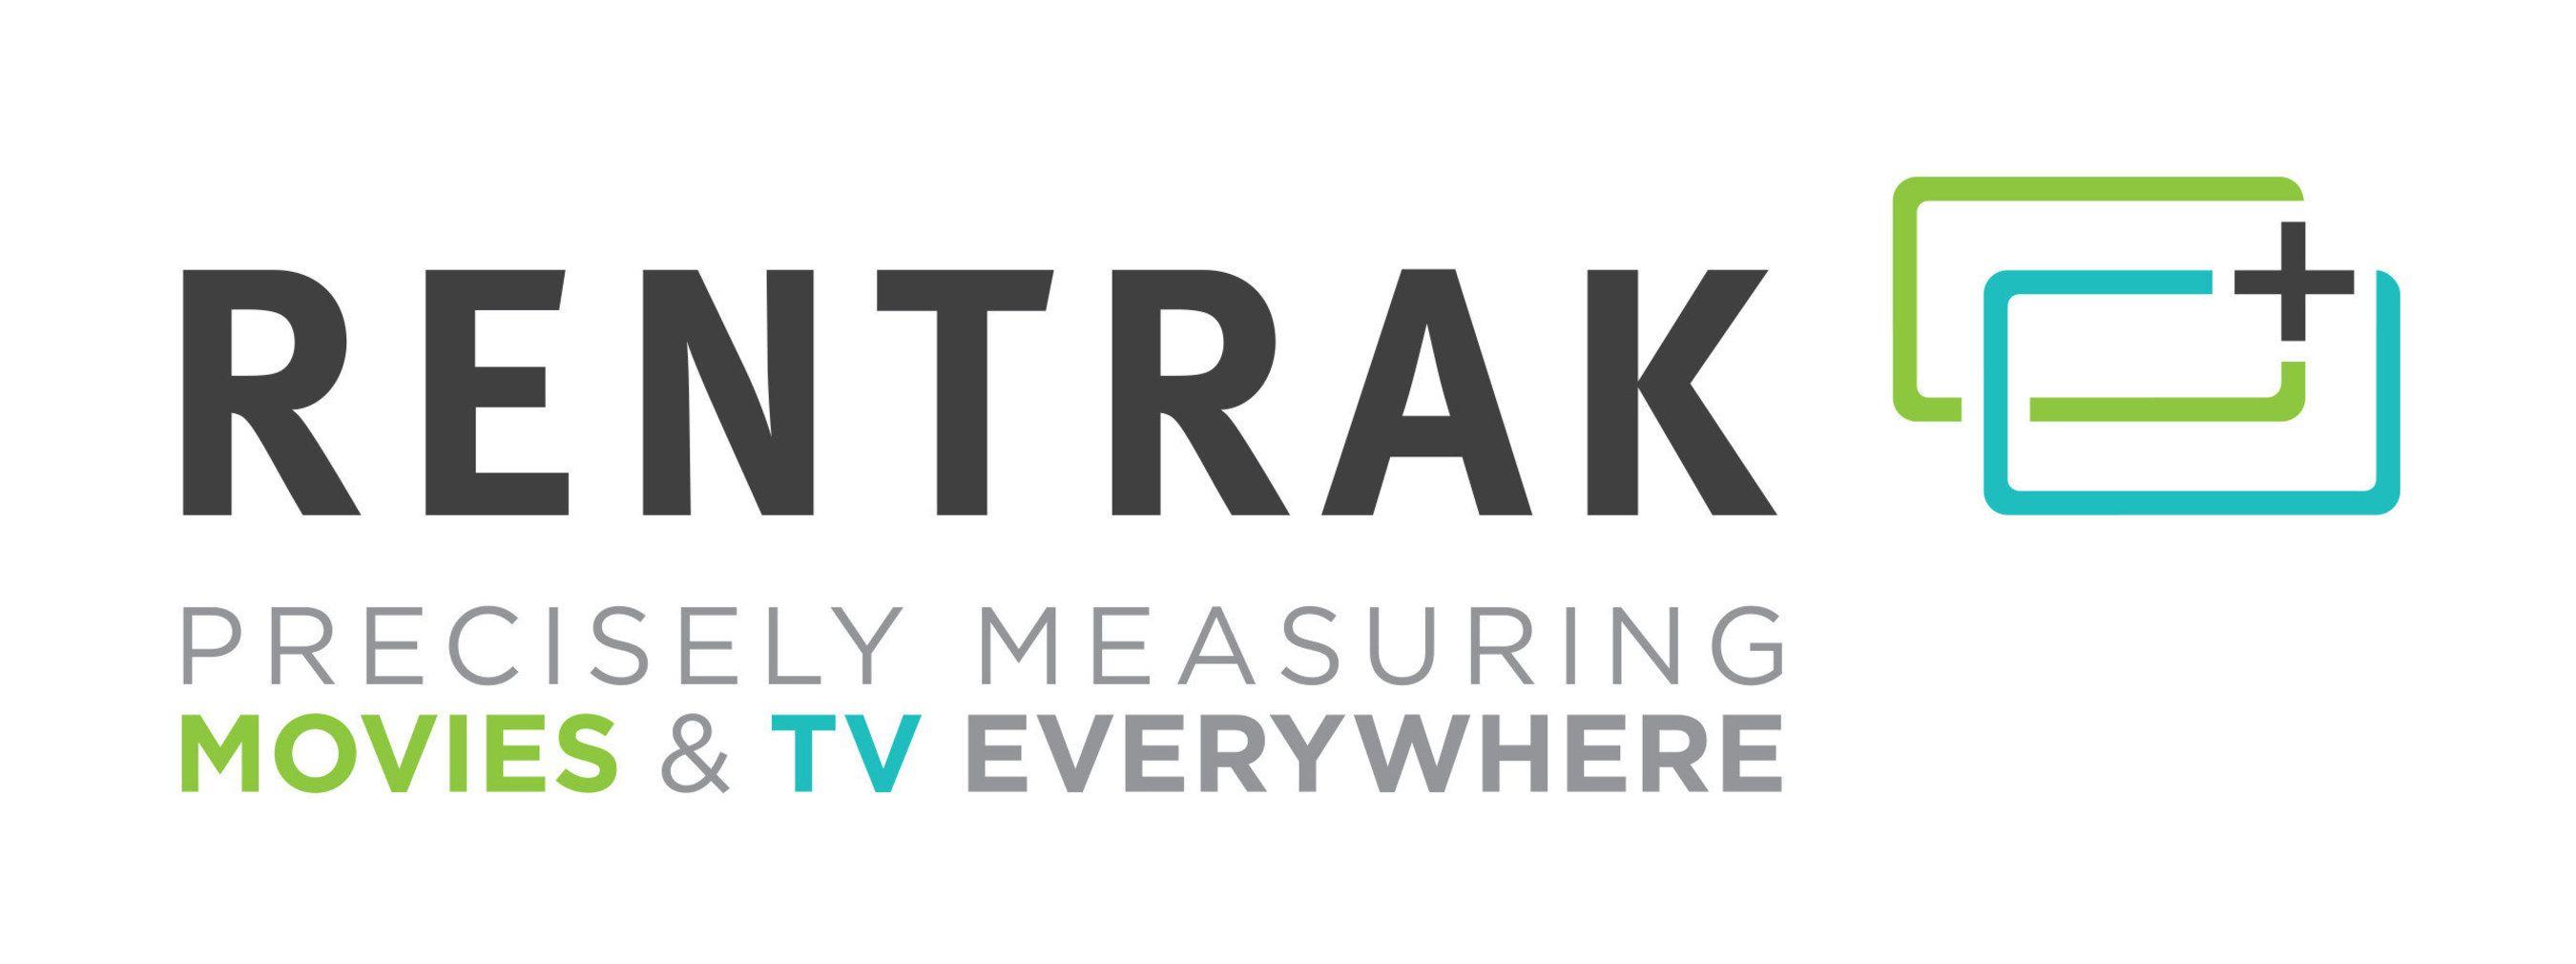 comScore Logo - comScore-Rentrak Merger Approved by Shareholders